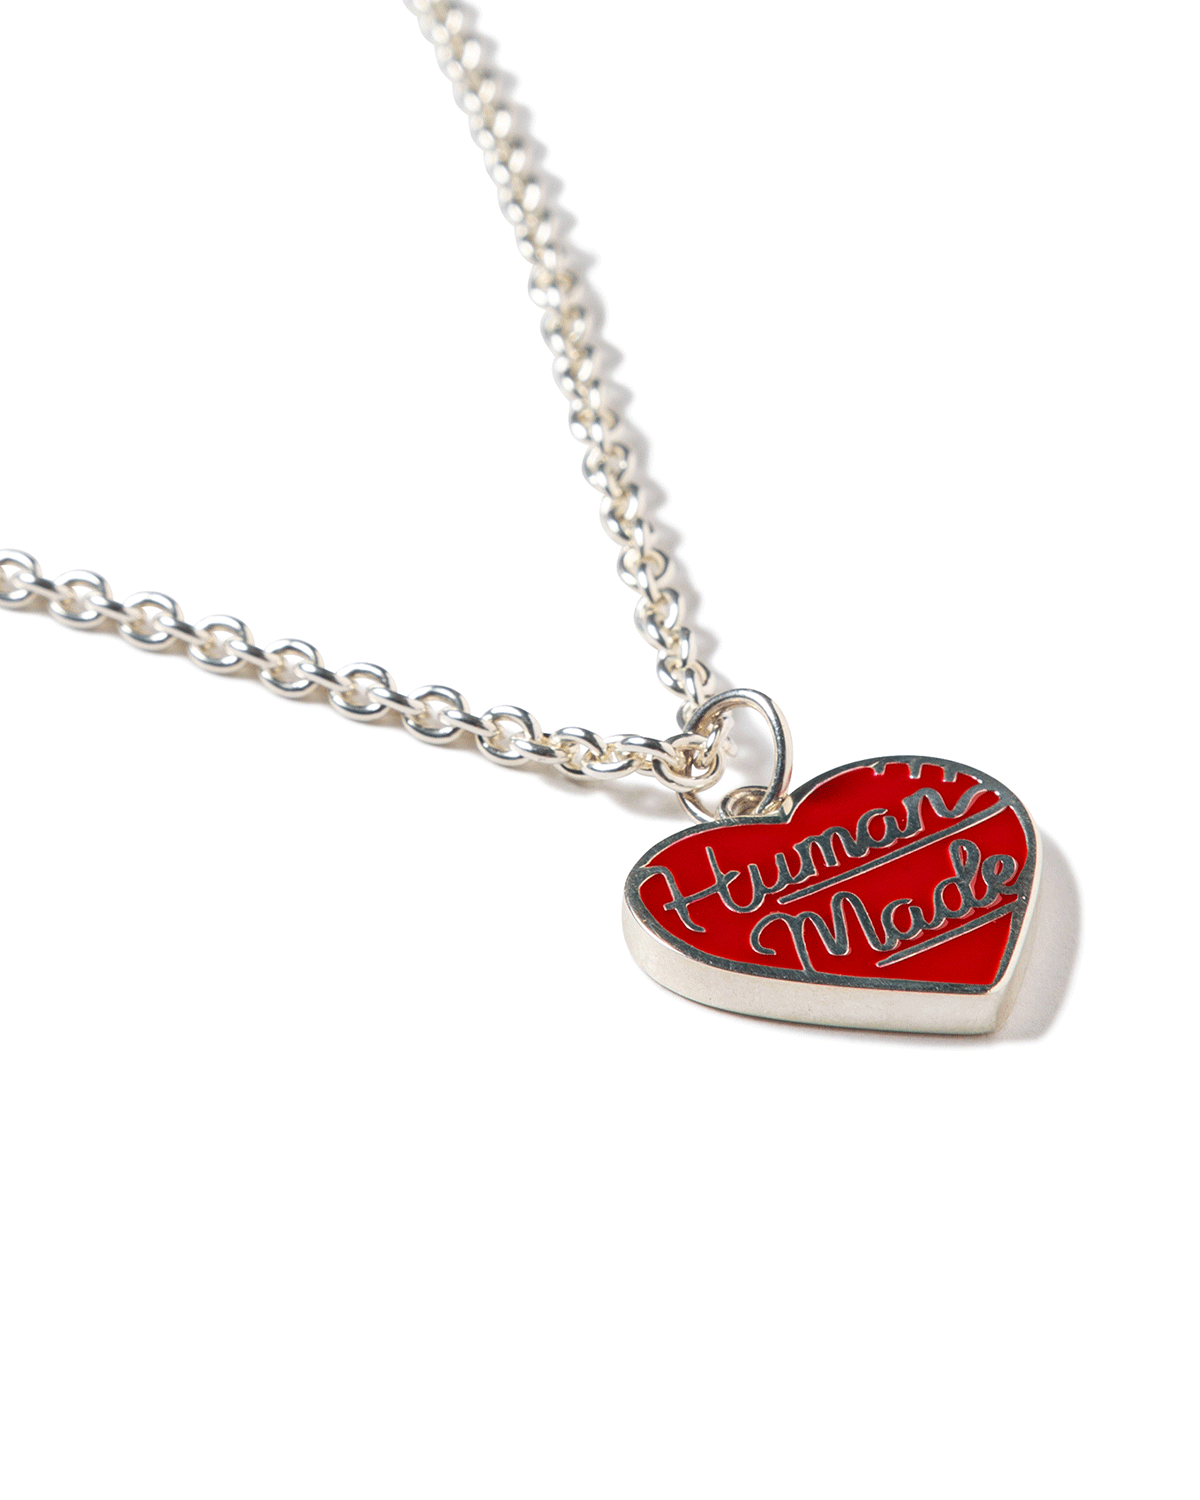 Heart Silver Necklace Red